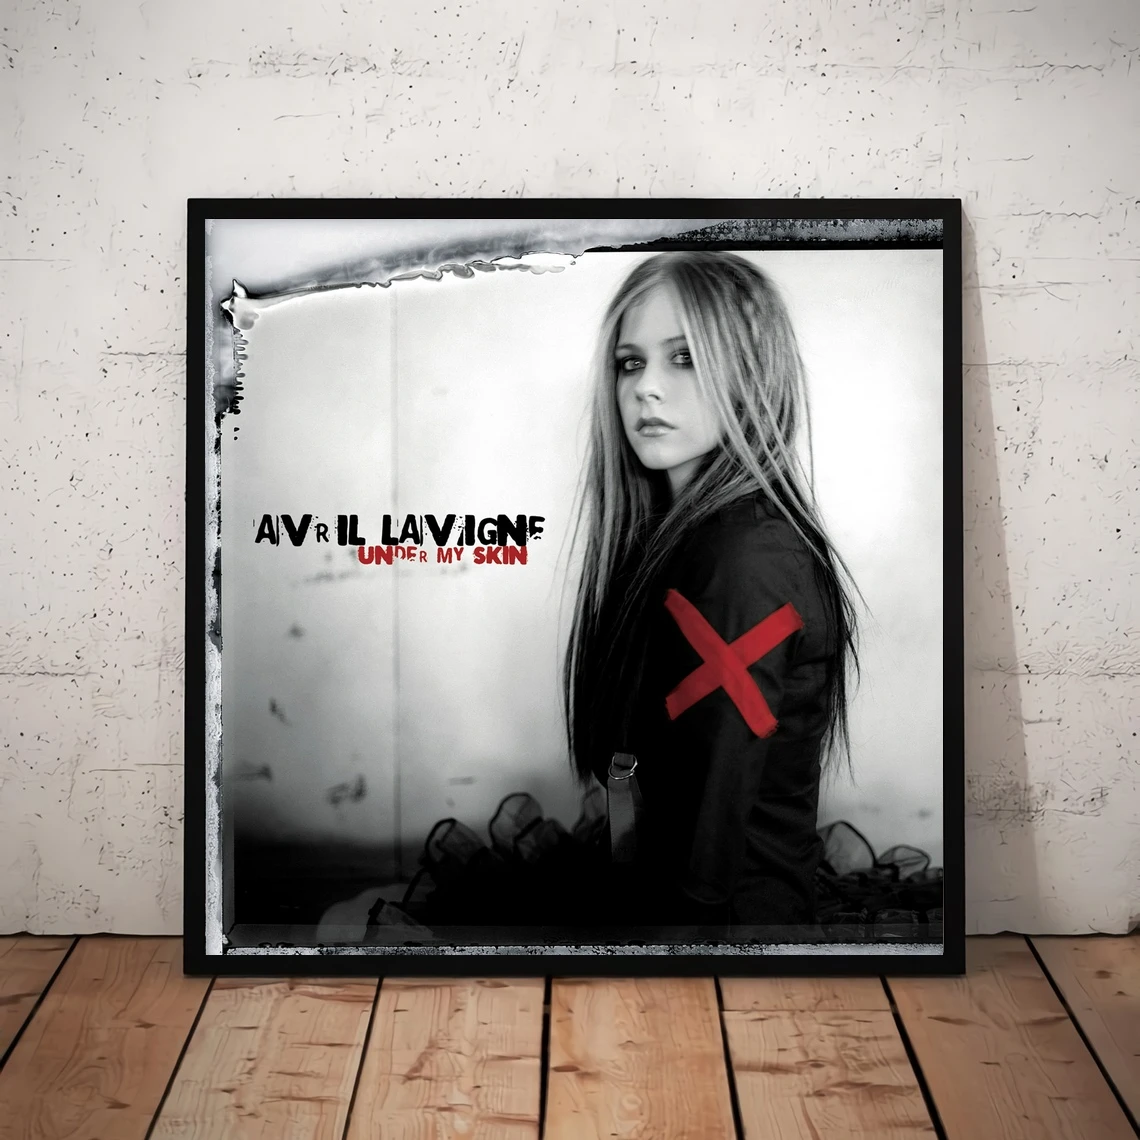 

Avril Lavigne Under My Skin Music Album Cover Poster Canvas Art Print Home Decoration Wall Painting ( No Frame )